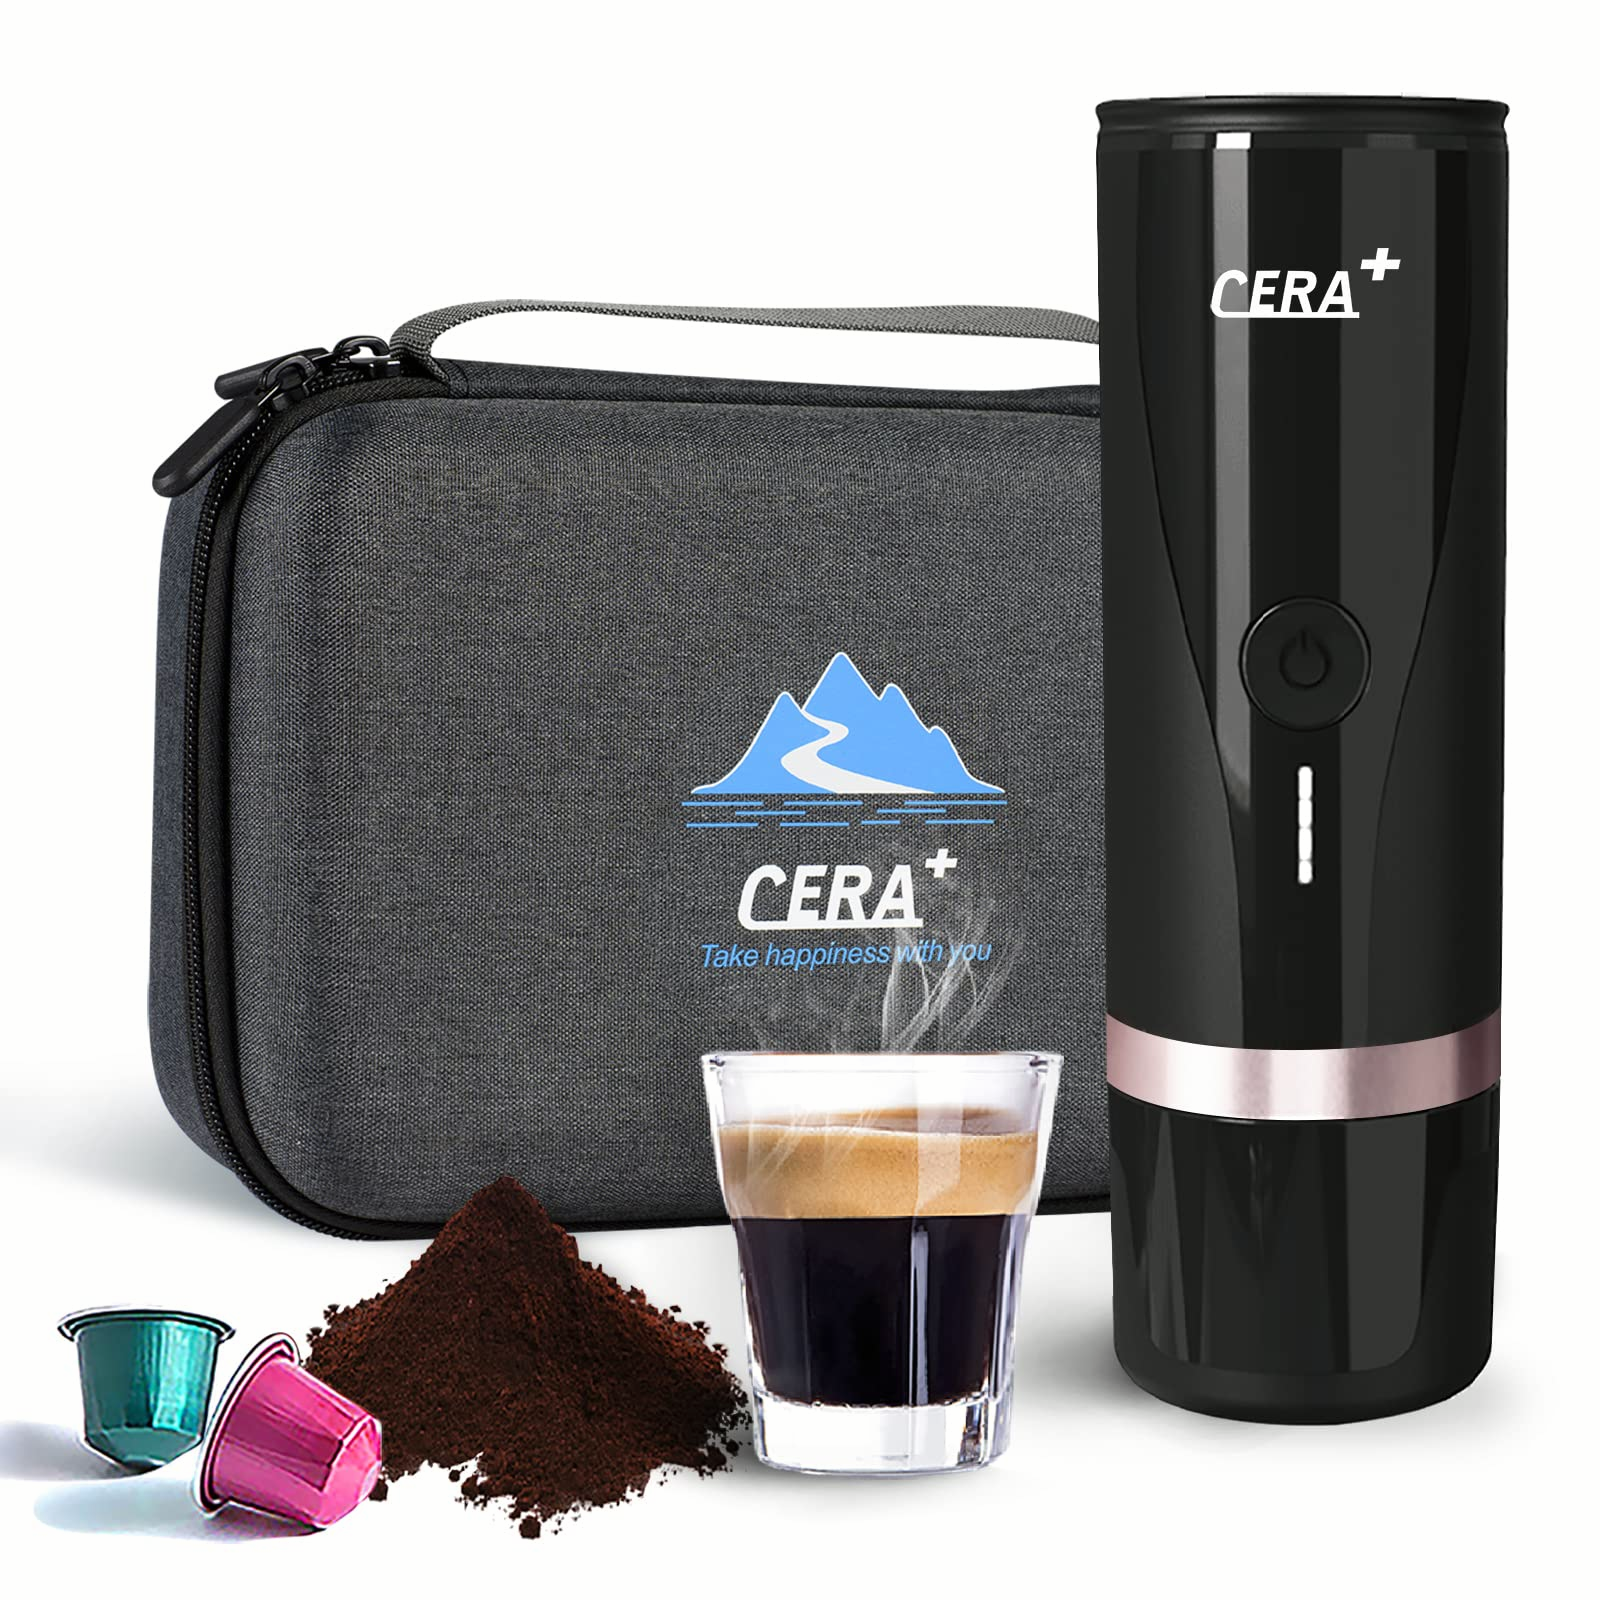 http://neso-pro.com/cdn/shop/products/PortableCoffeeMakerforTravel_3-4minsSelf-Heating20BarRechargeableMiniCampingEspressoMachine_CompatiblewithNSPods_GroundCoffeeforHome_Office_OutdoorCampaignwithCarryingCasebyNeso-Pro0.png?v=1659748983